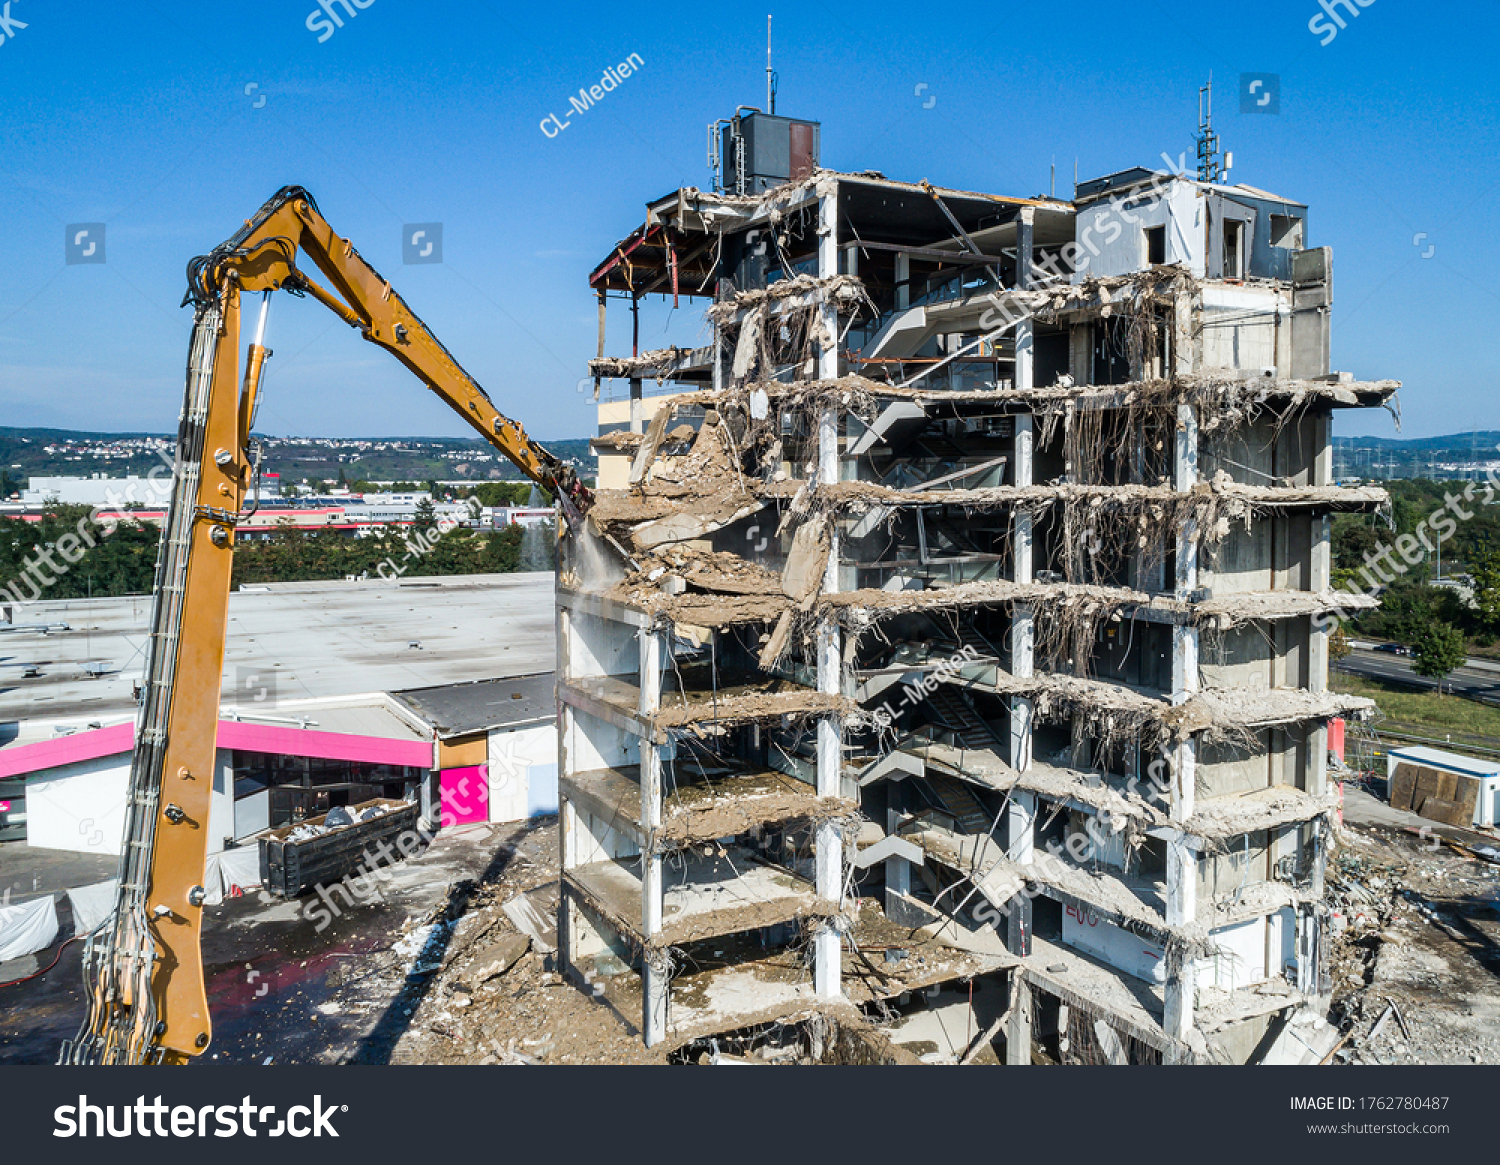 Aerial view of Building House Demolition and construction site Excavator with hydraulic crasher machine #1762780487